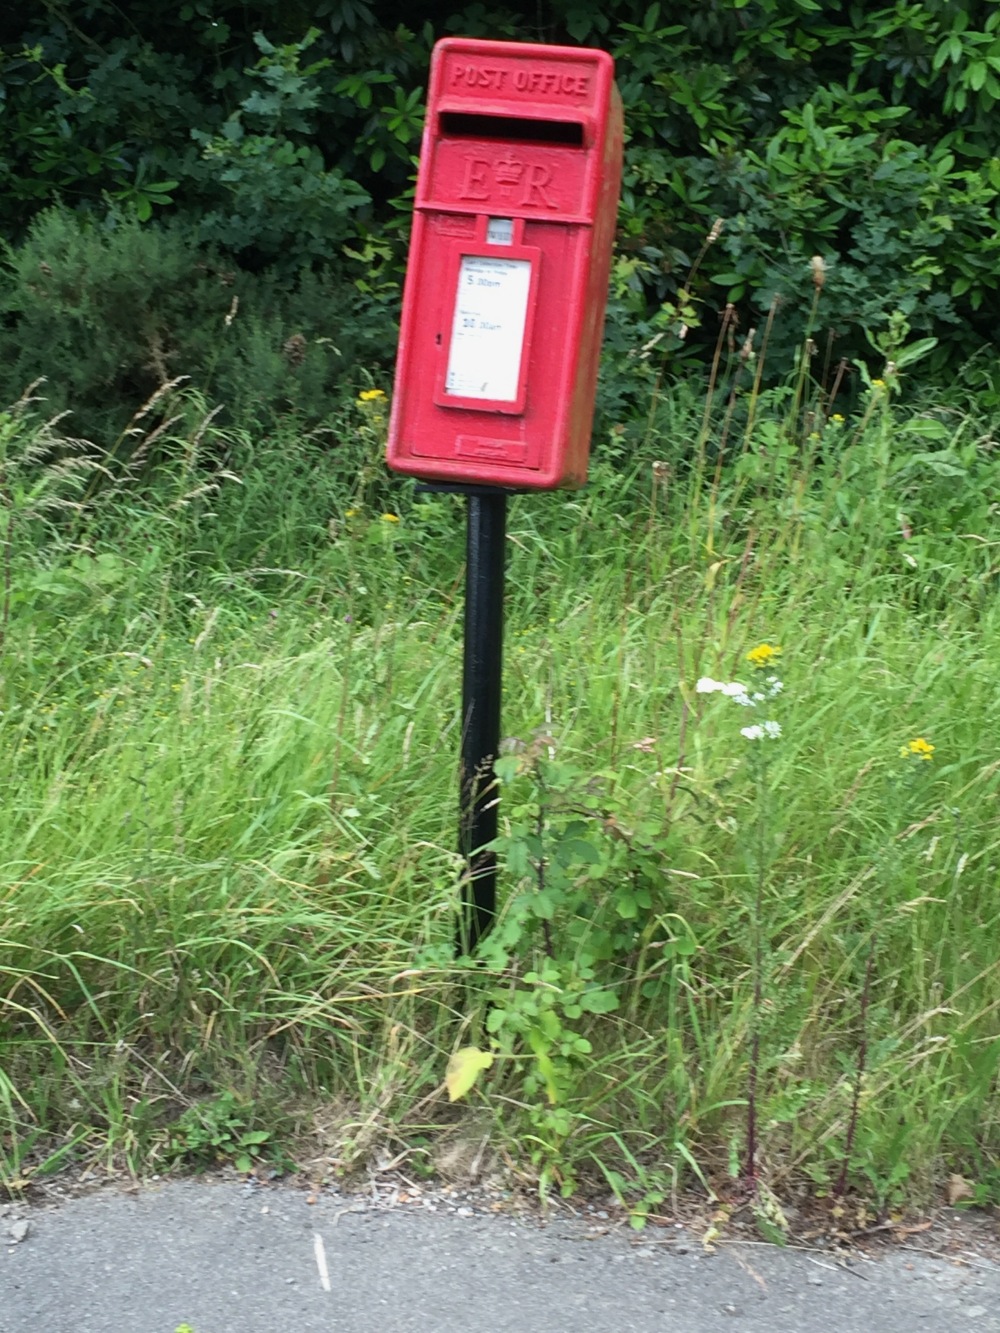 The Lonely Post Box